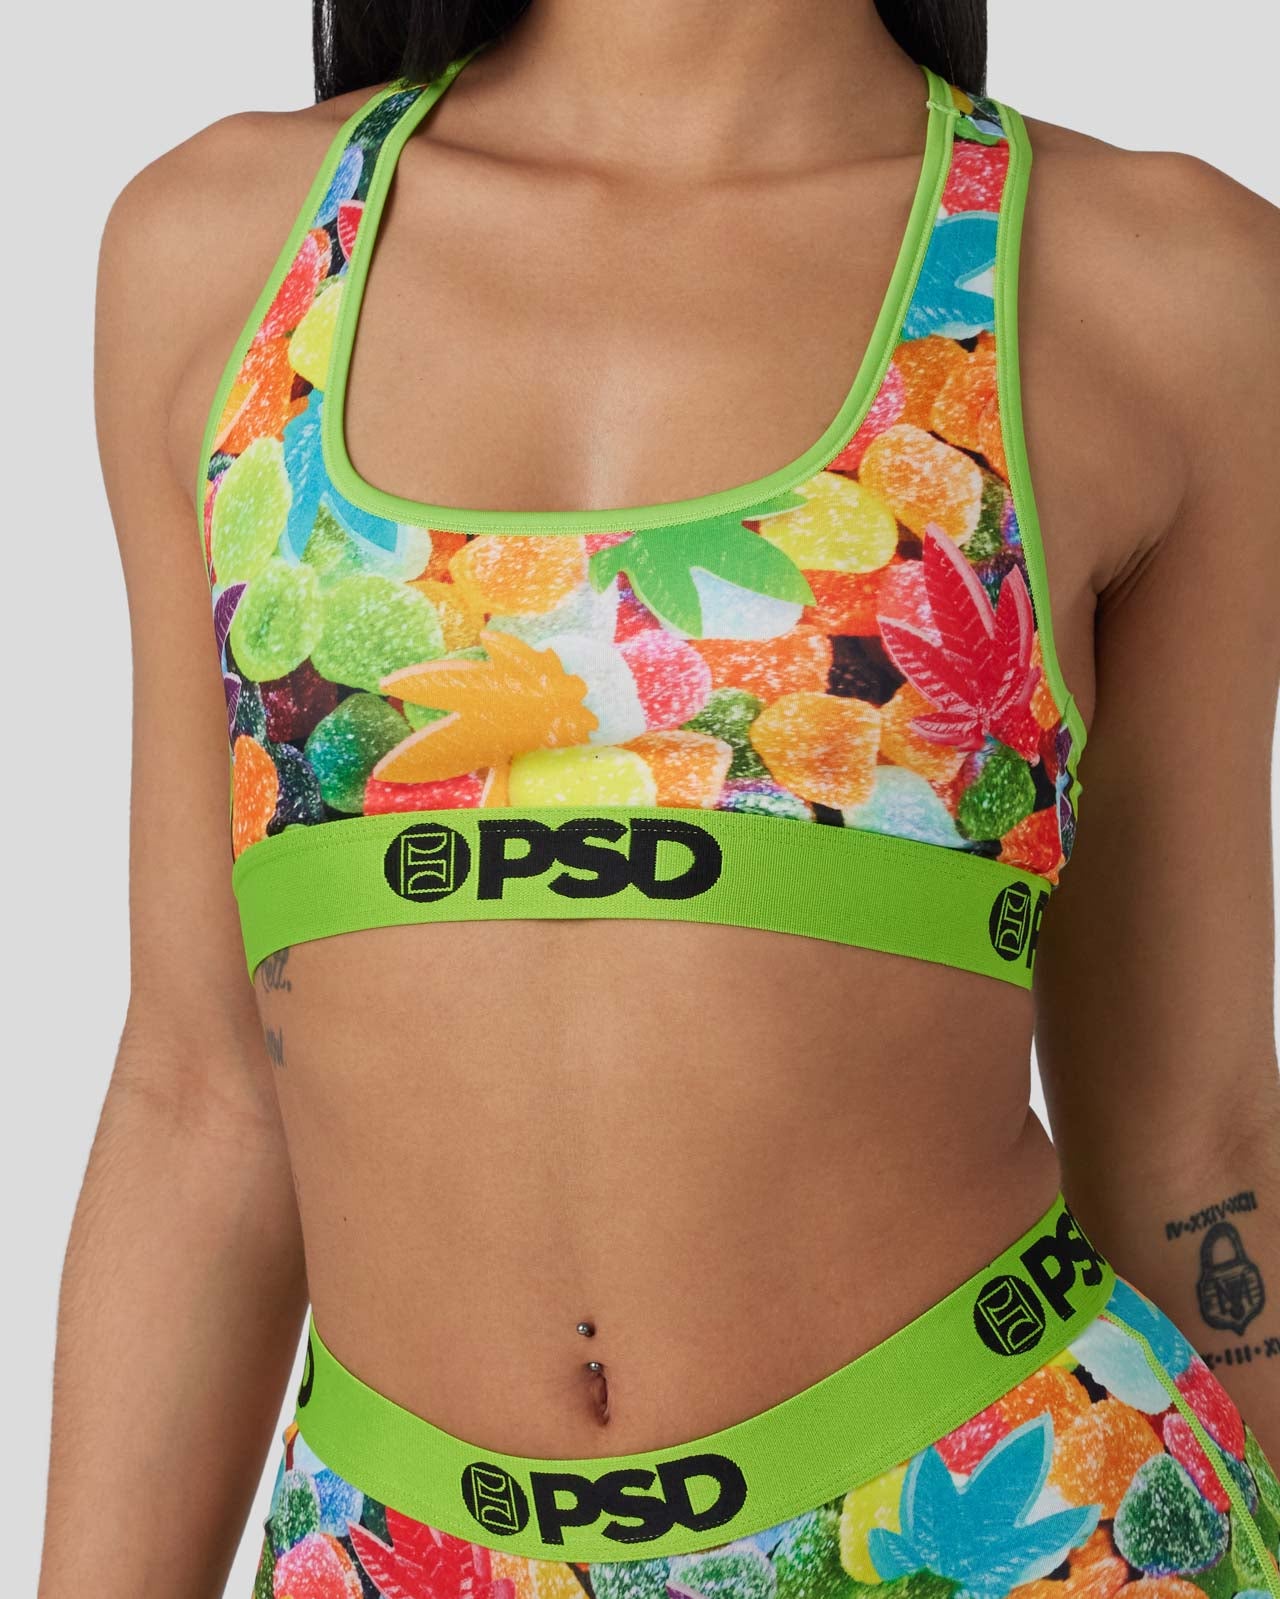 PSD Women's Sports Bra - Sommer Ray Collection | Athletic Racerback,  Breathable Microfiber Blend, Elastic Band